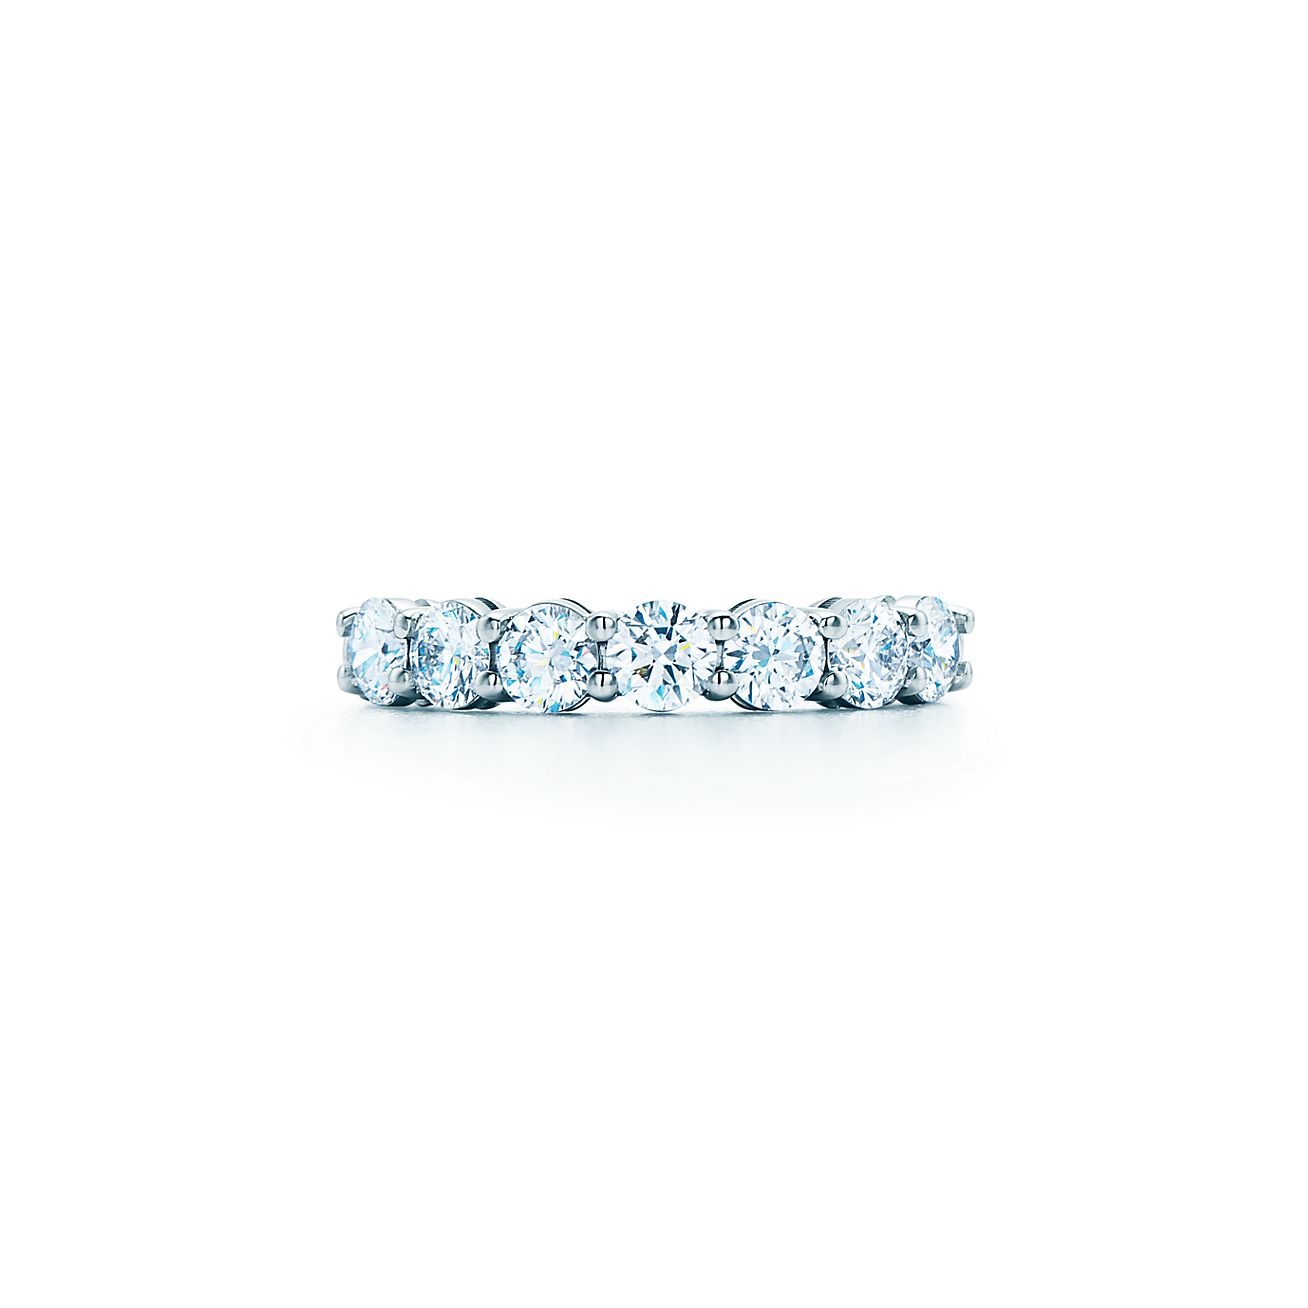 Tiffany Embrace™ band ring in platinum 